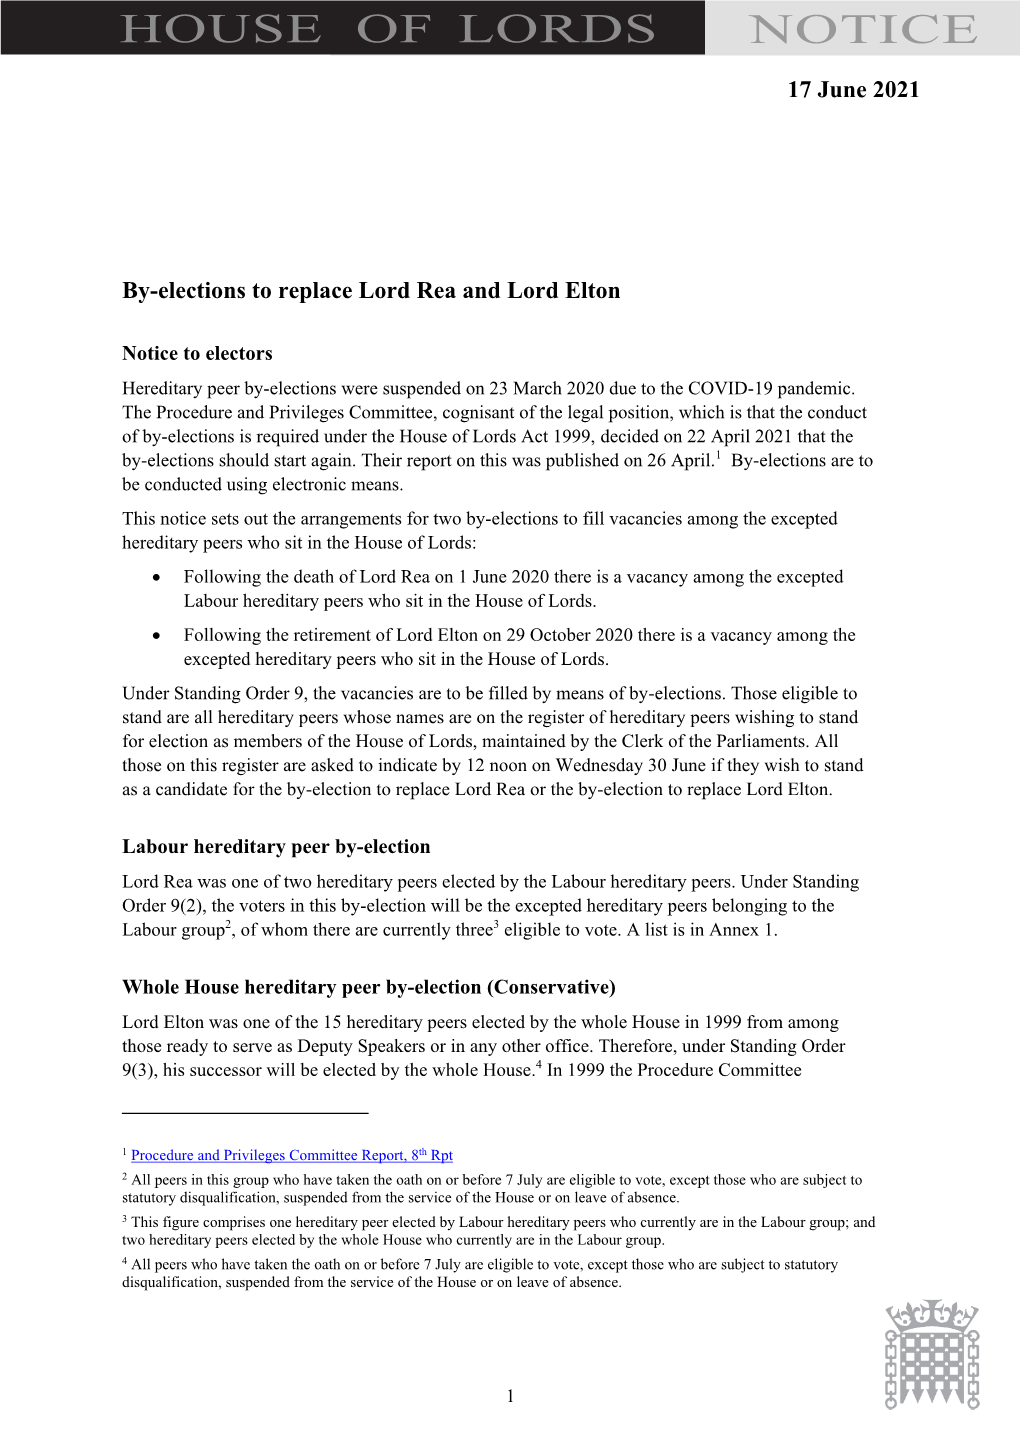 By-Elections to Replace Lord Rea and Lord Elton: Notice to Electors